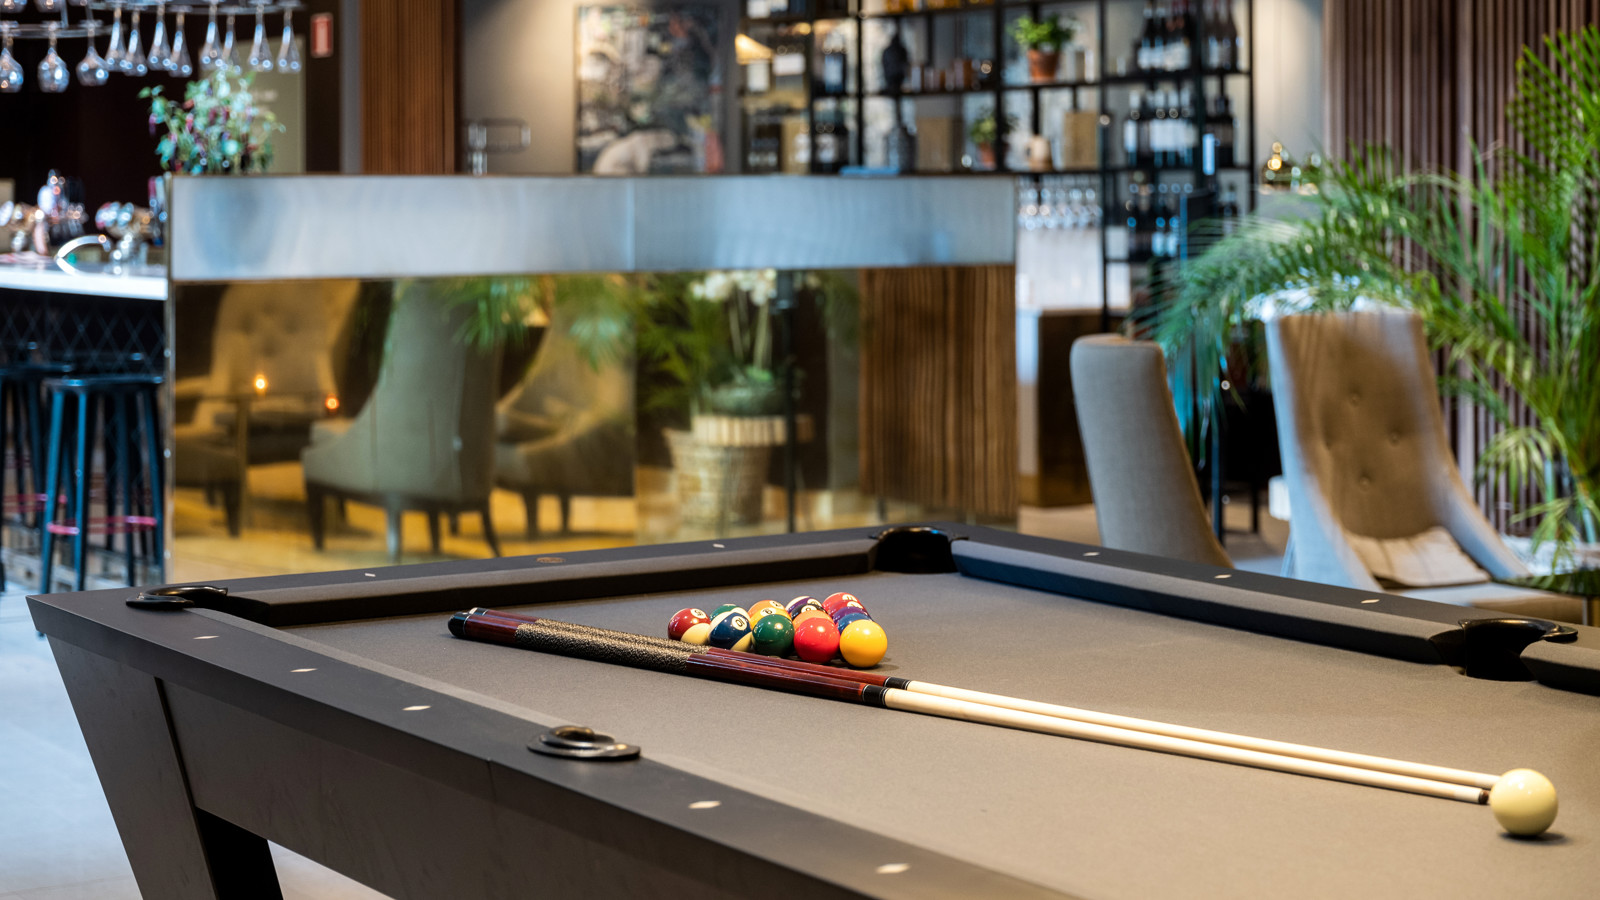 Pool table in a hotel bar